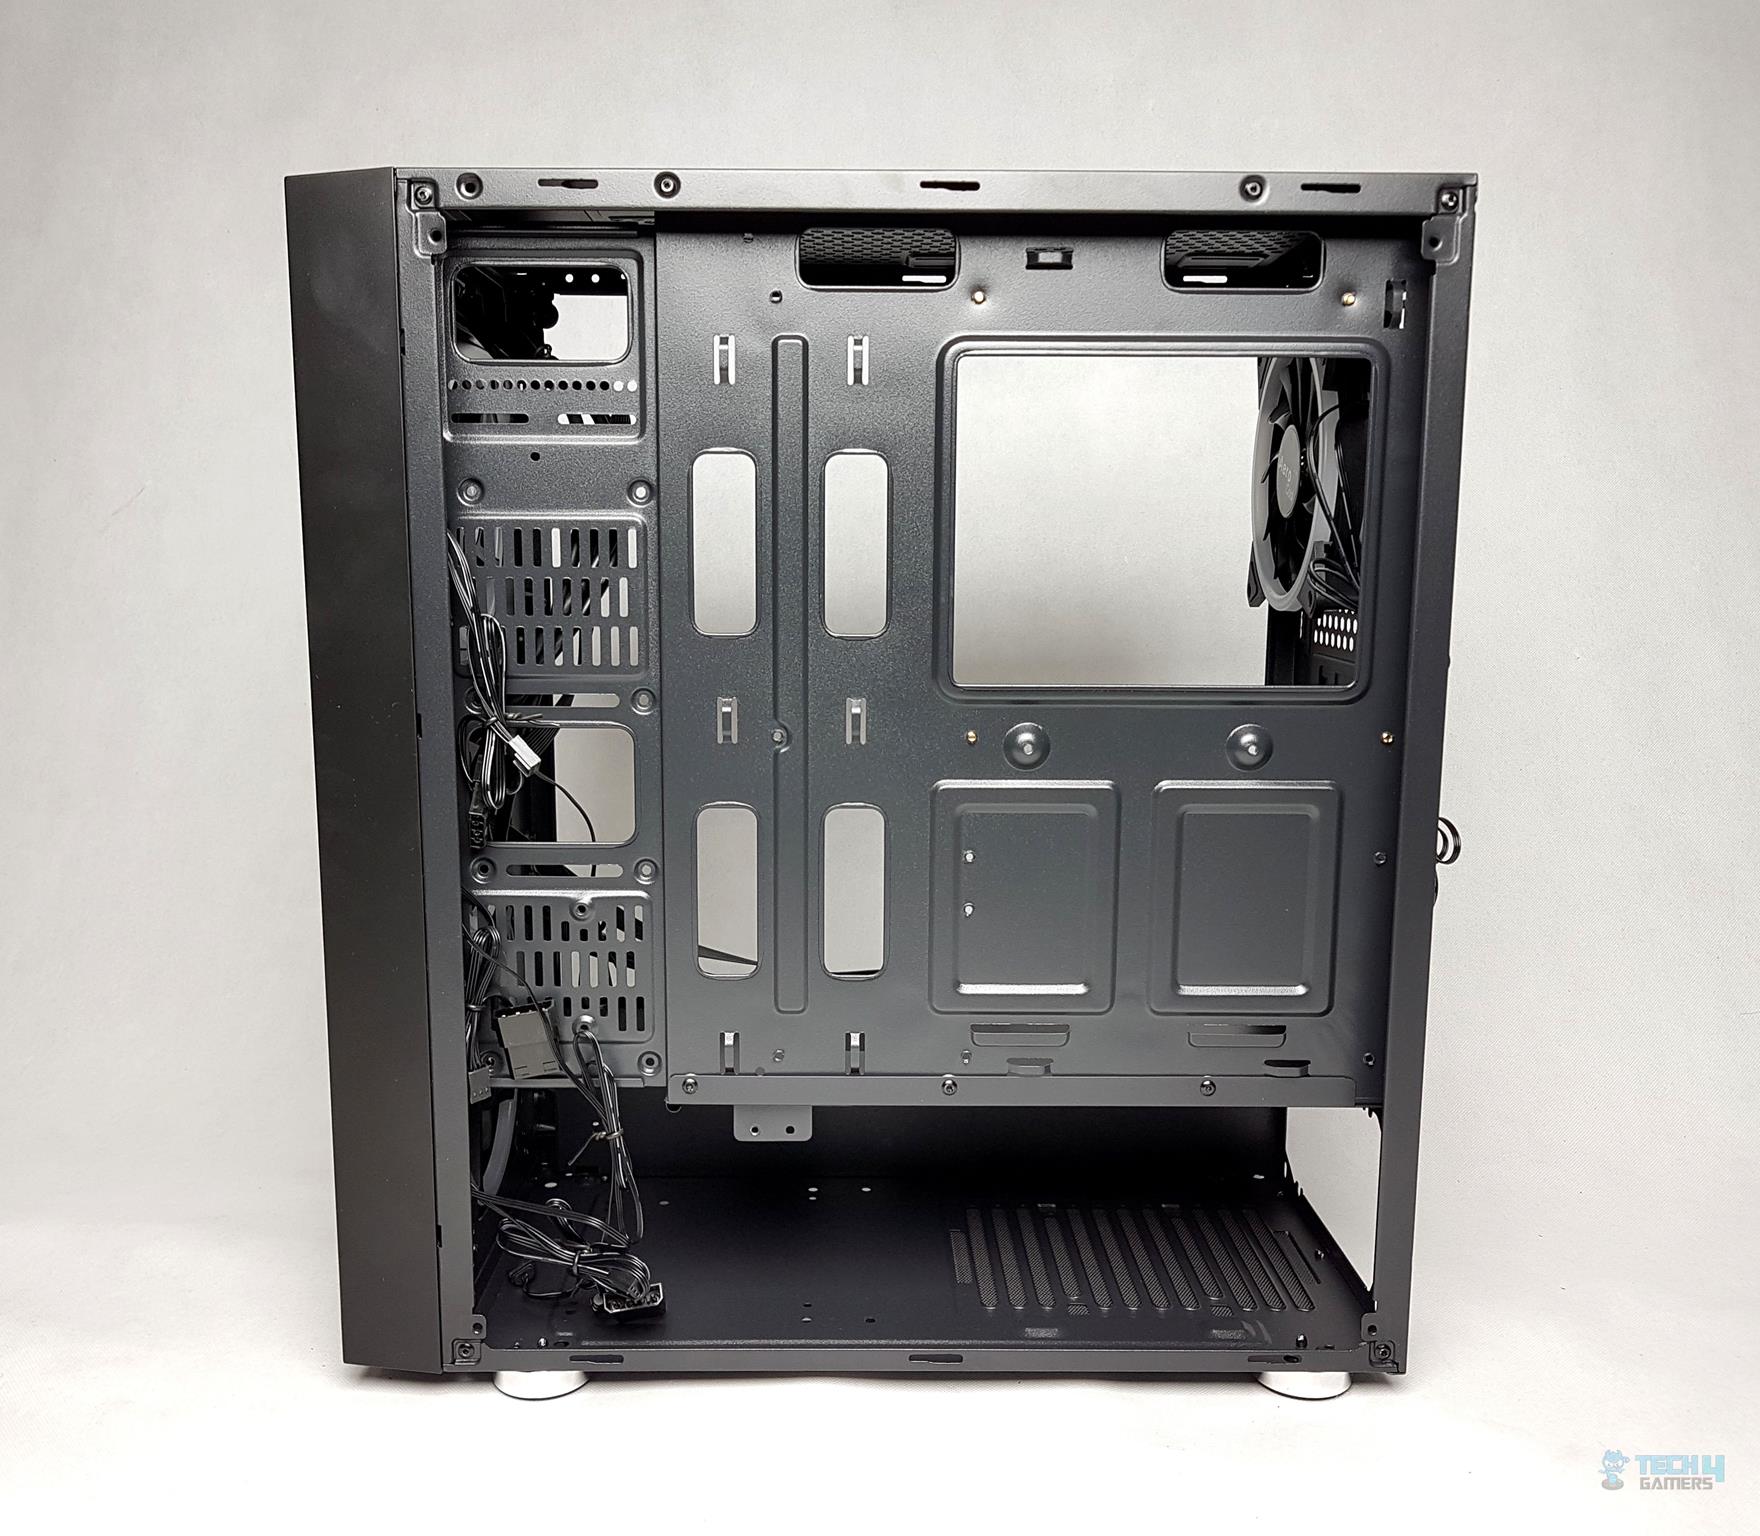  Aerocool Quartz Revo RGB Mid-Tower Chassis — The backside with the HDD cage and 2.5” drive brackets removed